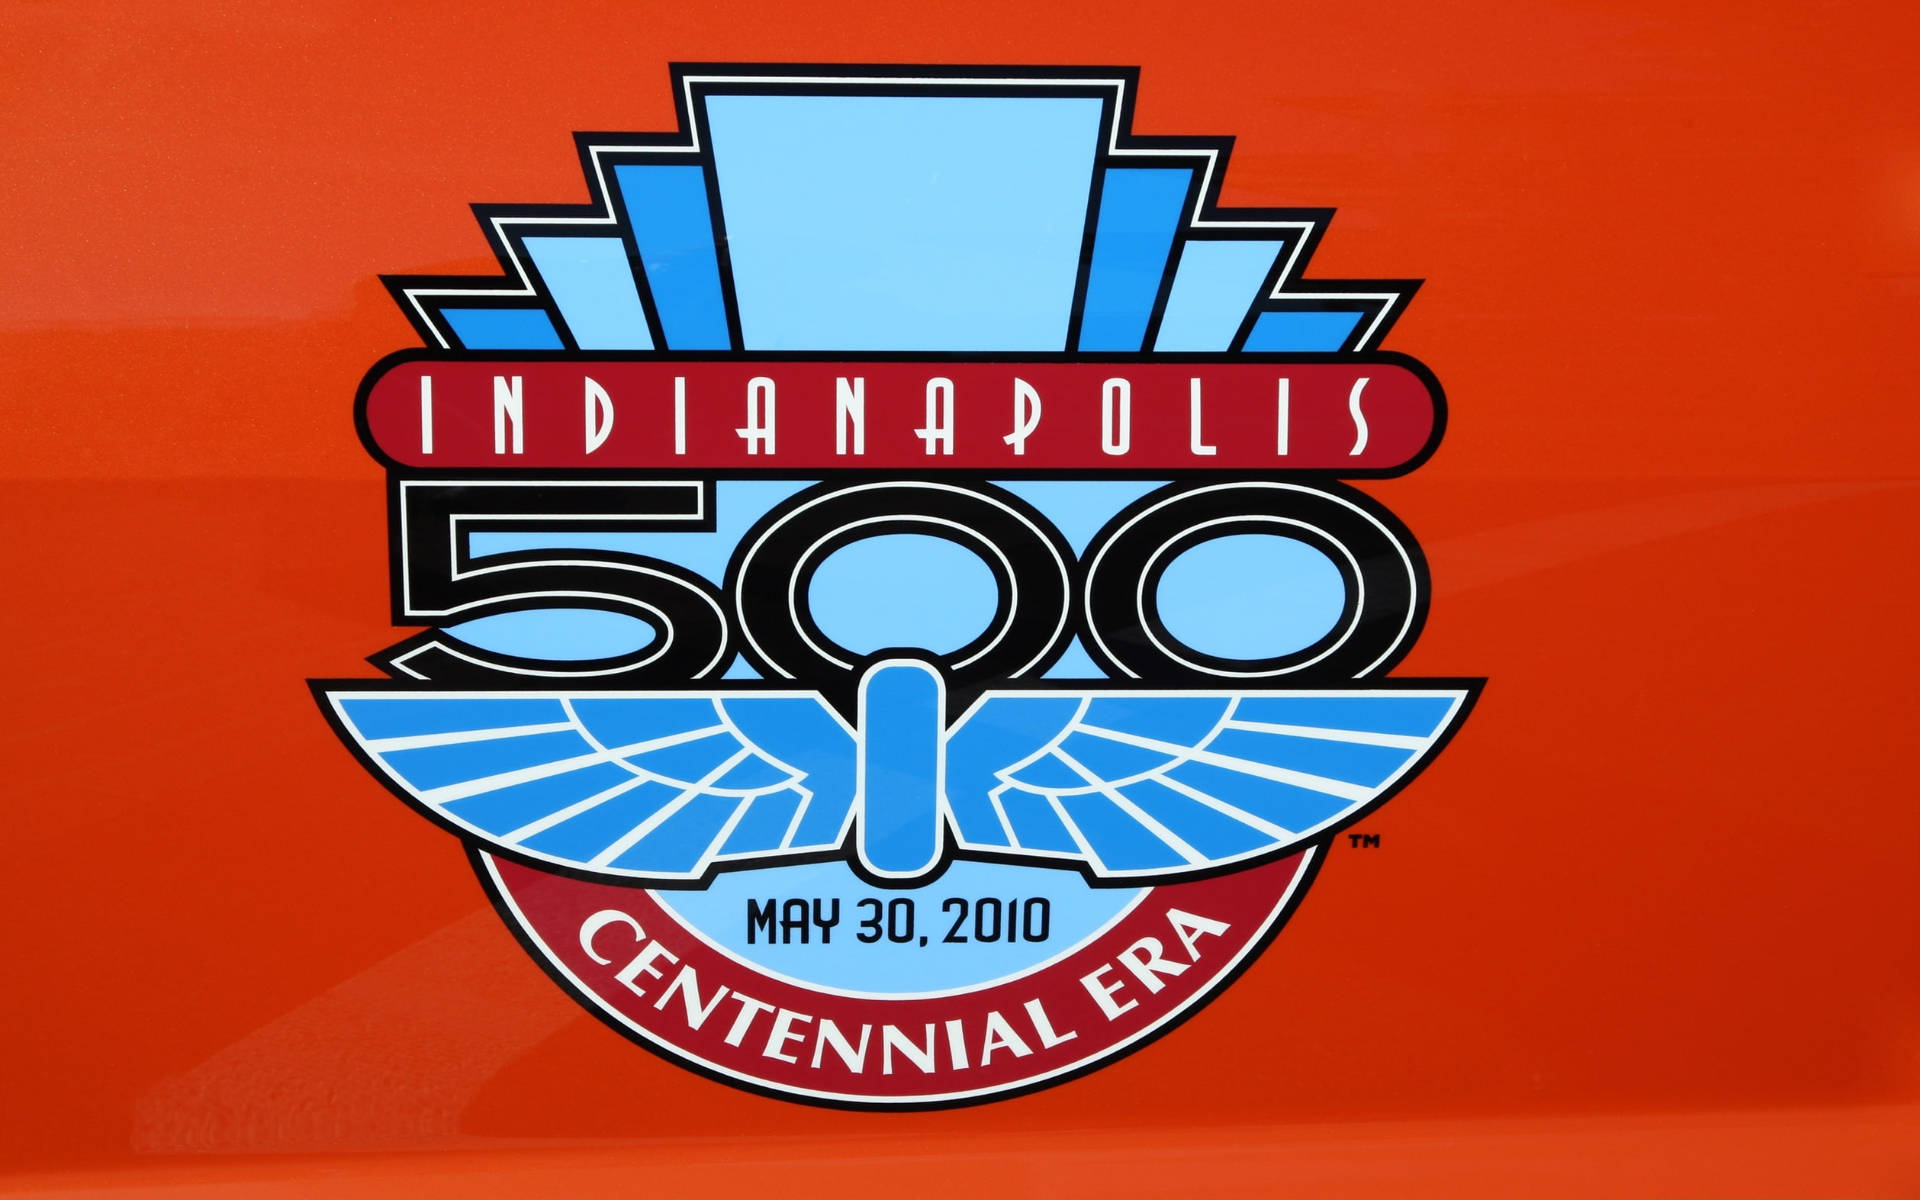 Indianapolis 500 Emblem In Red Background